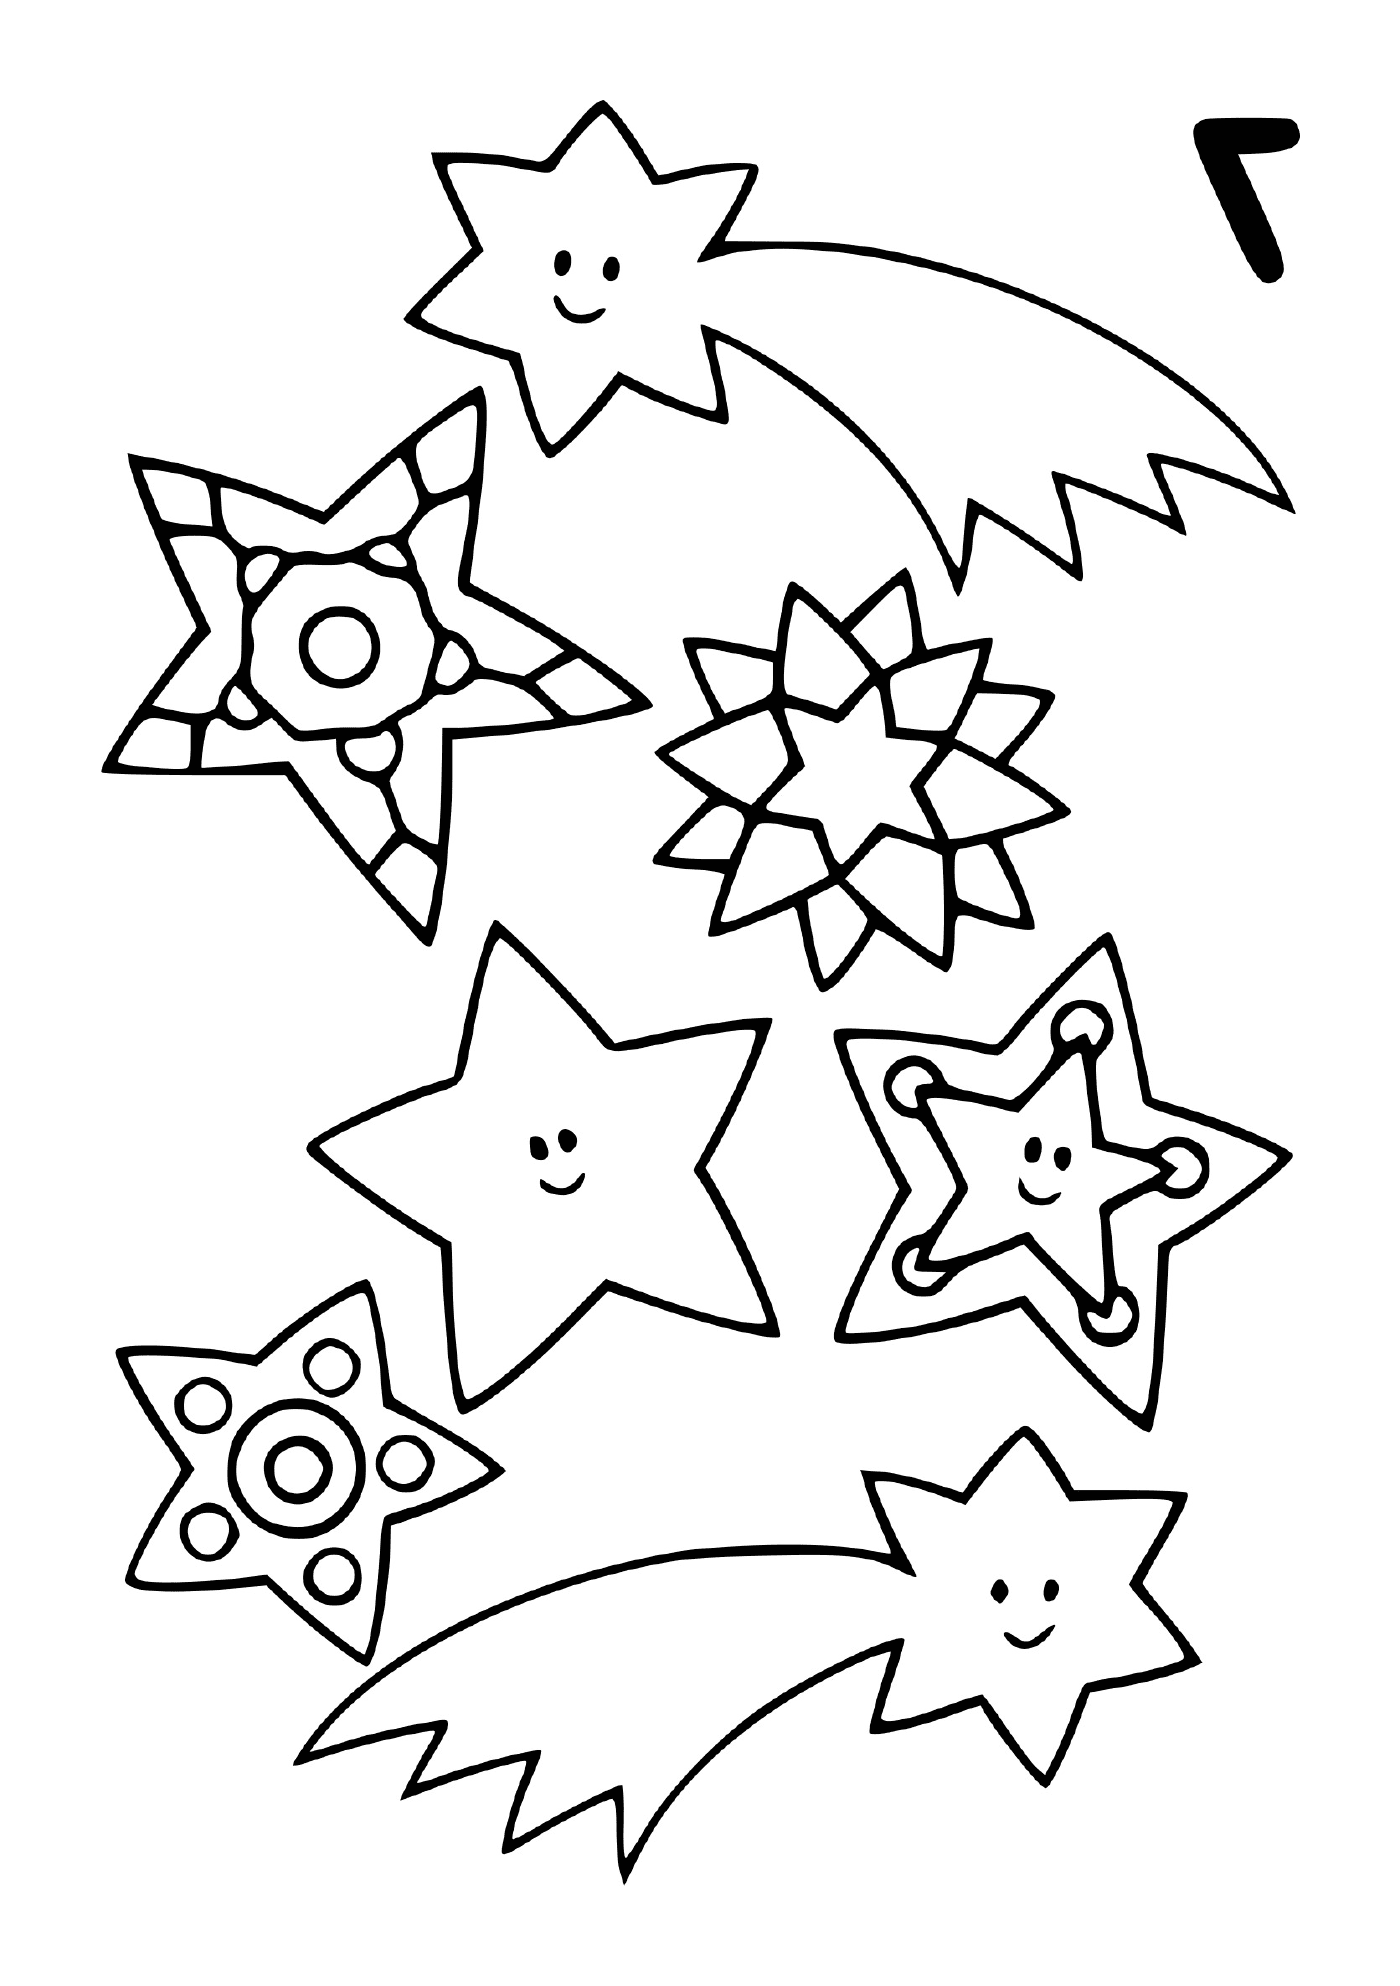  A set of shooting stars in different shapes 